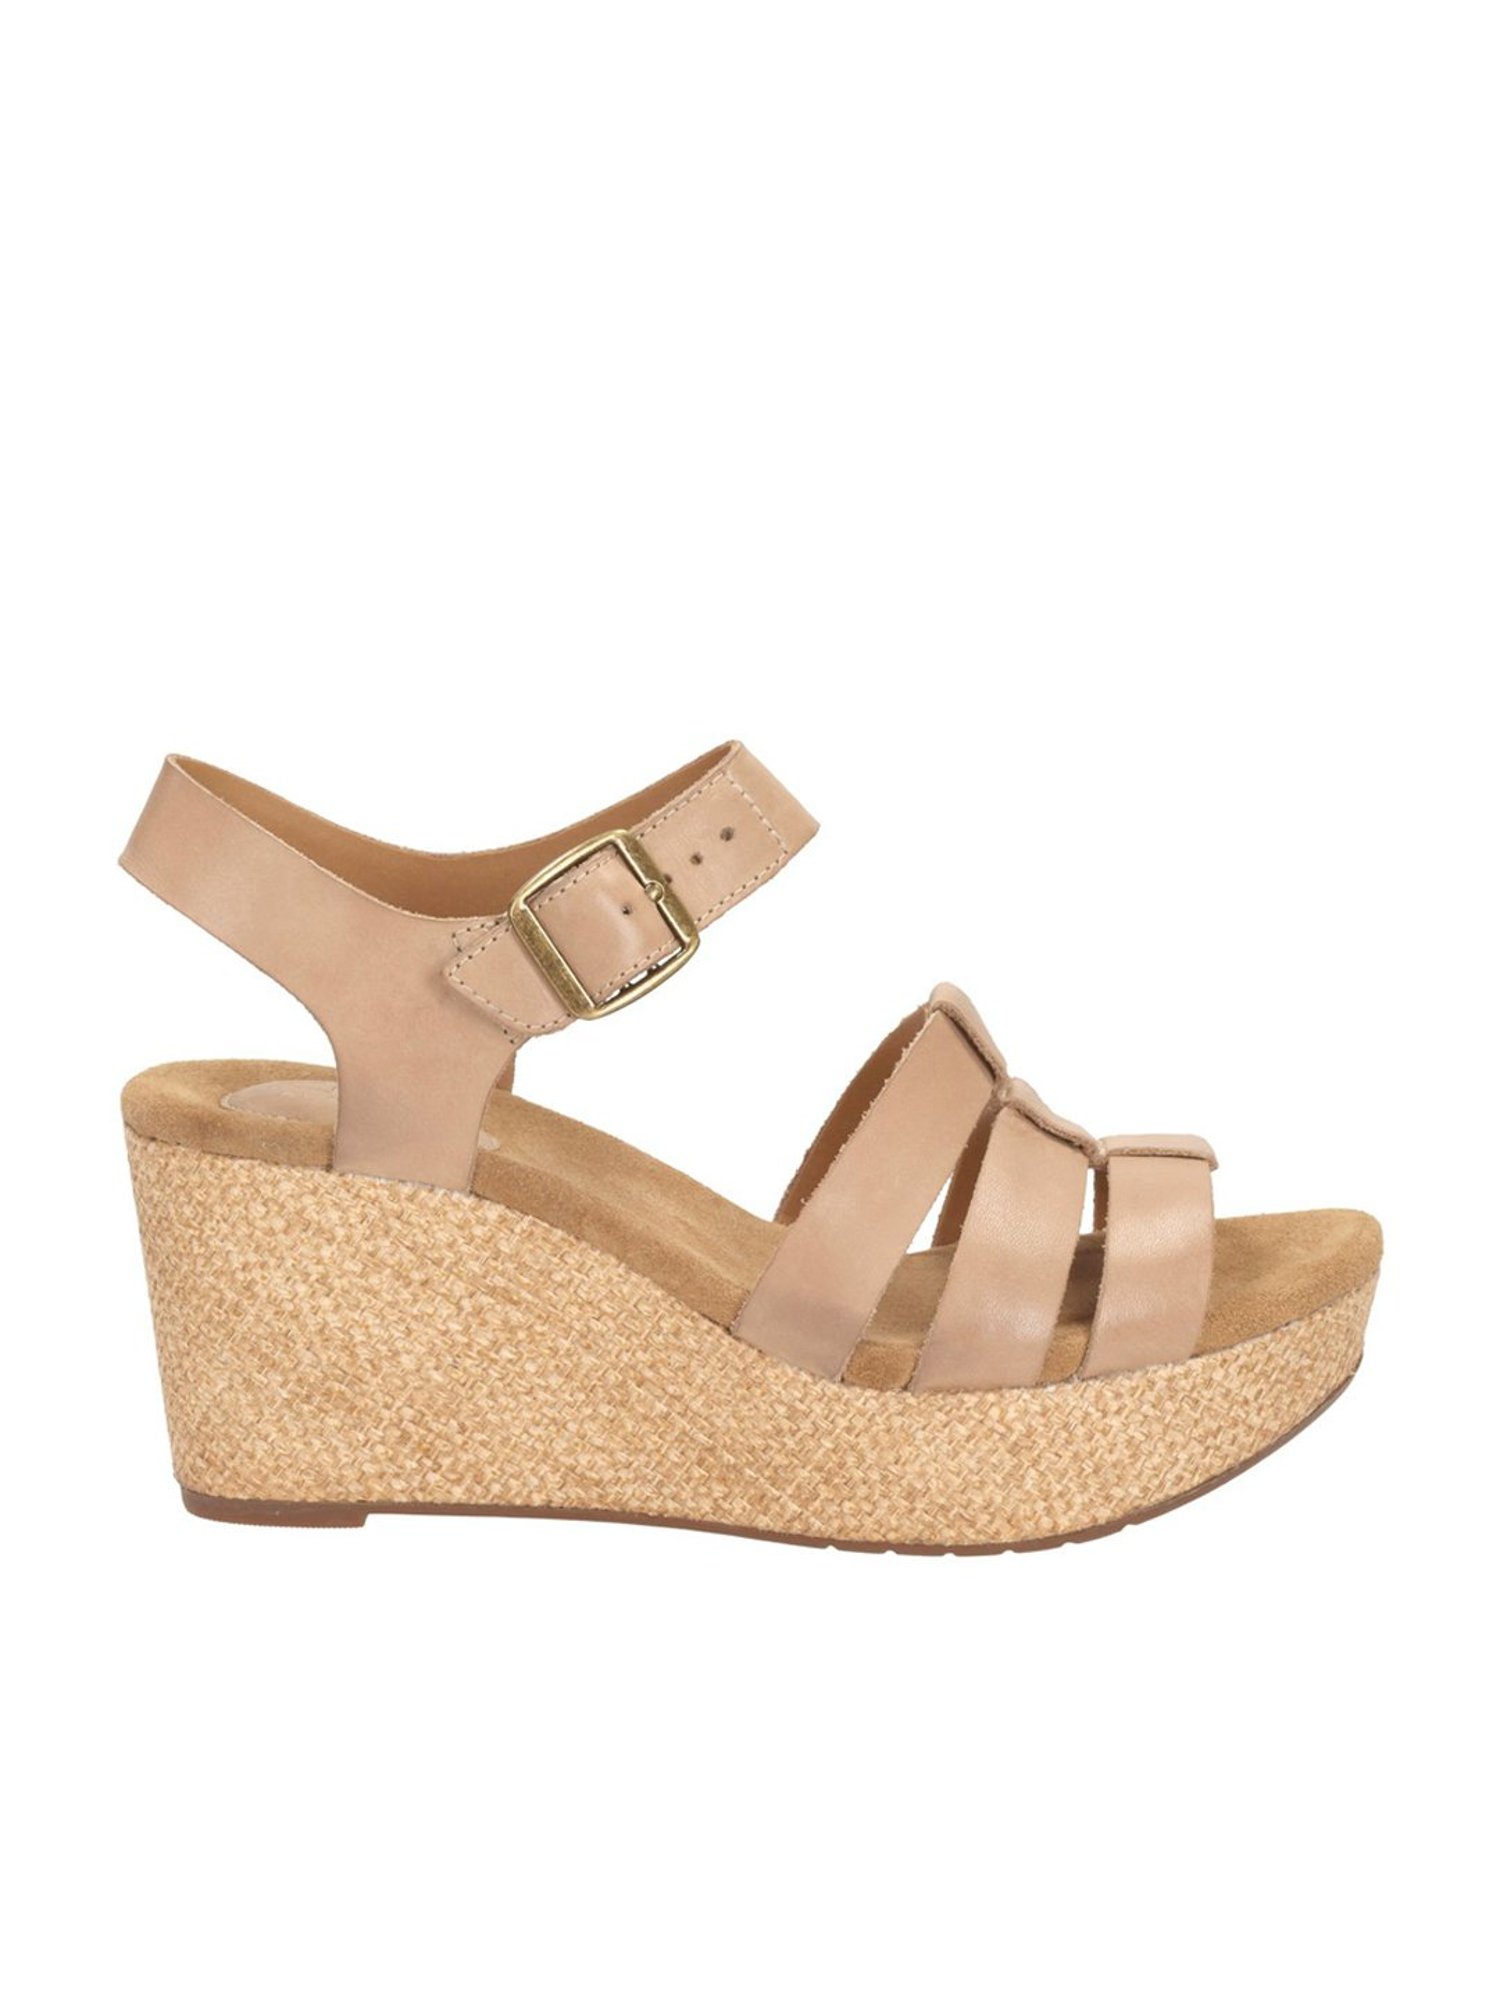 Buy Clarks Caslynn Harp Ankle Strap for Women at Best Price @ Tata CLiQ